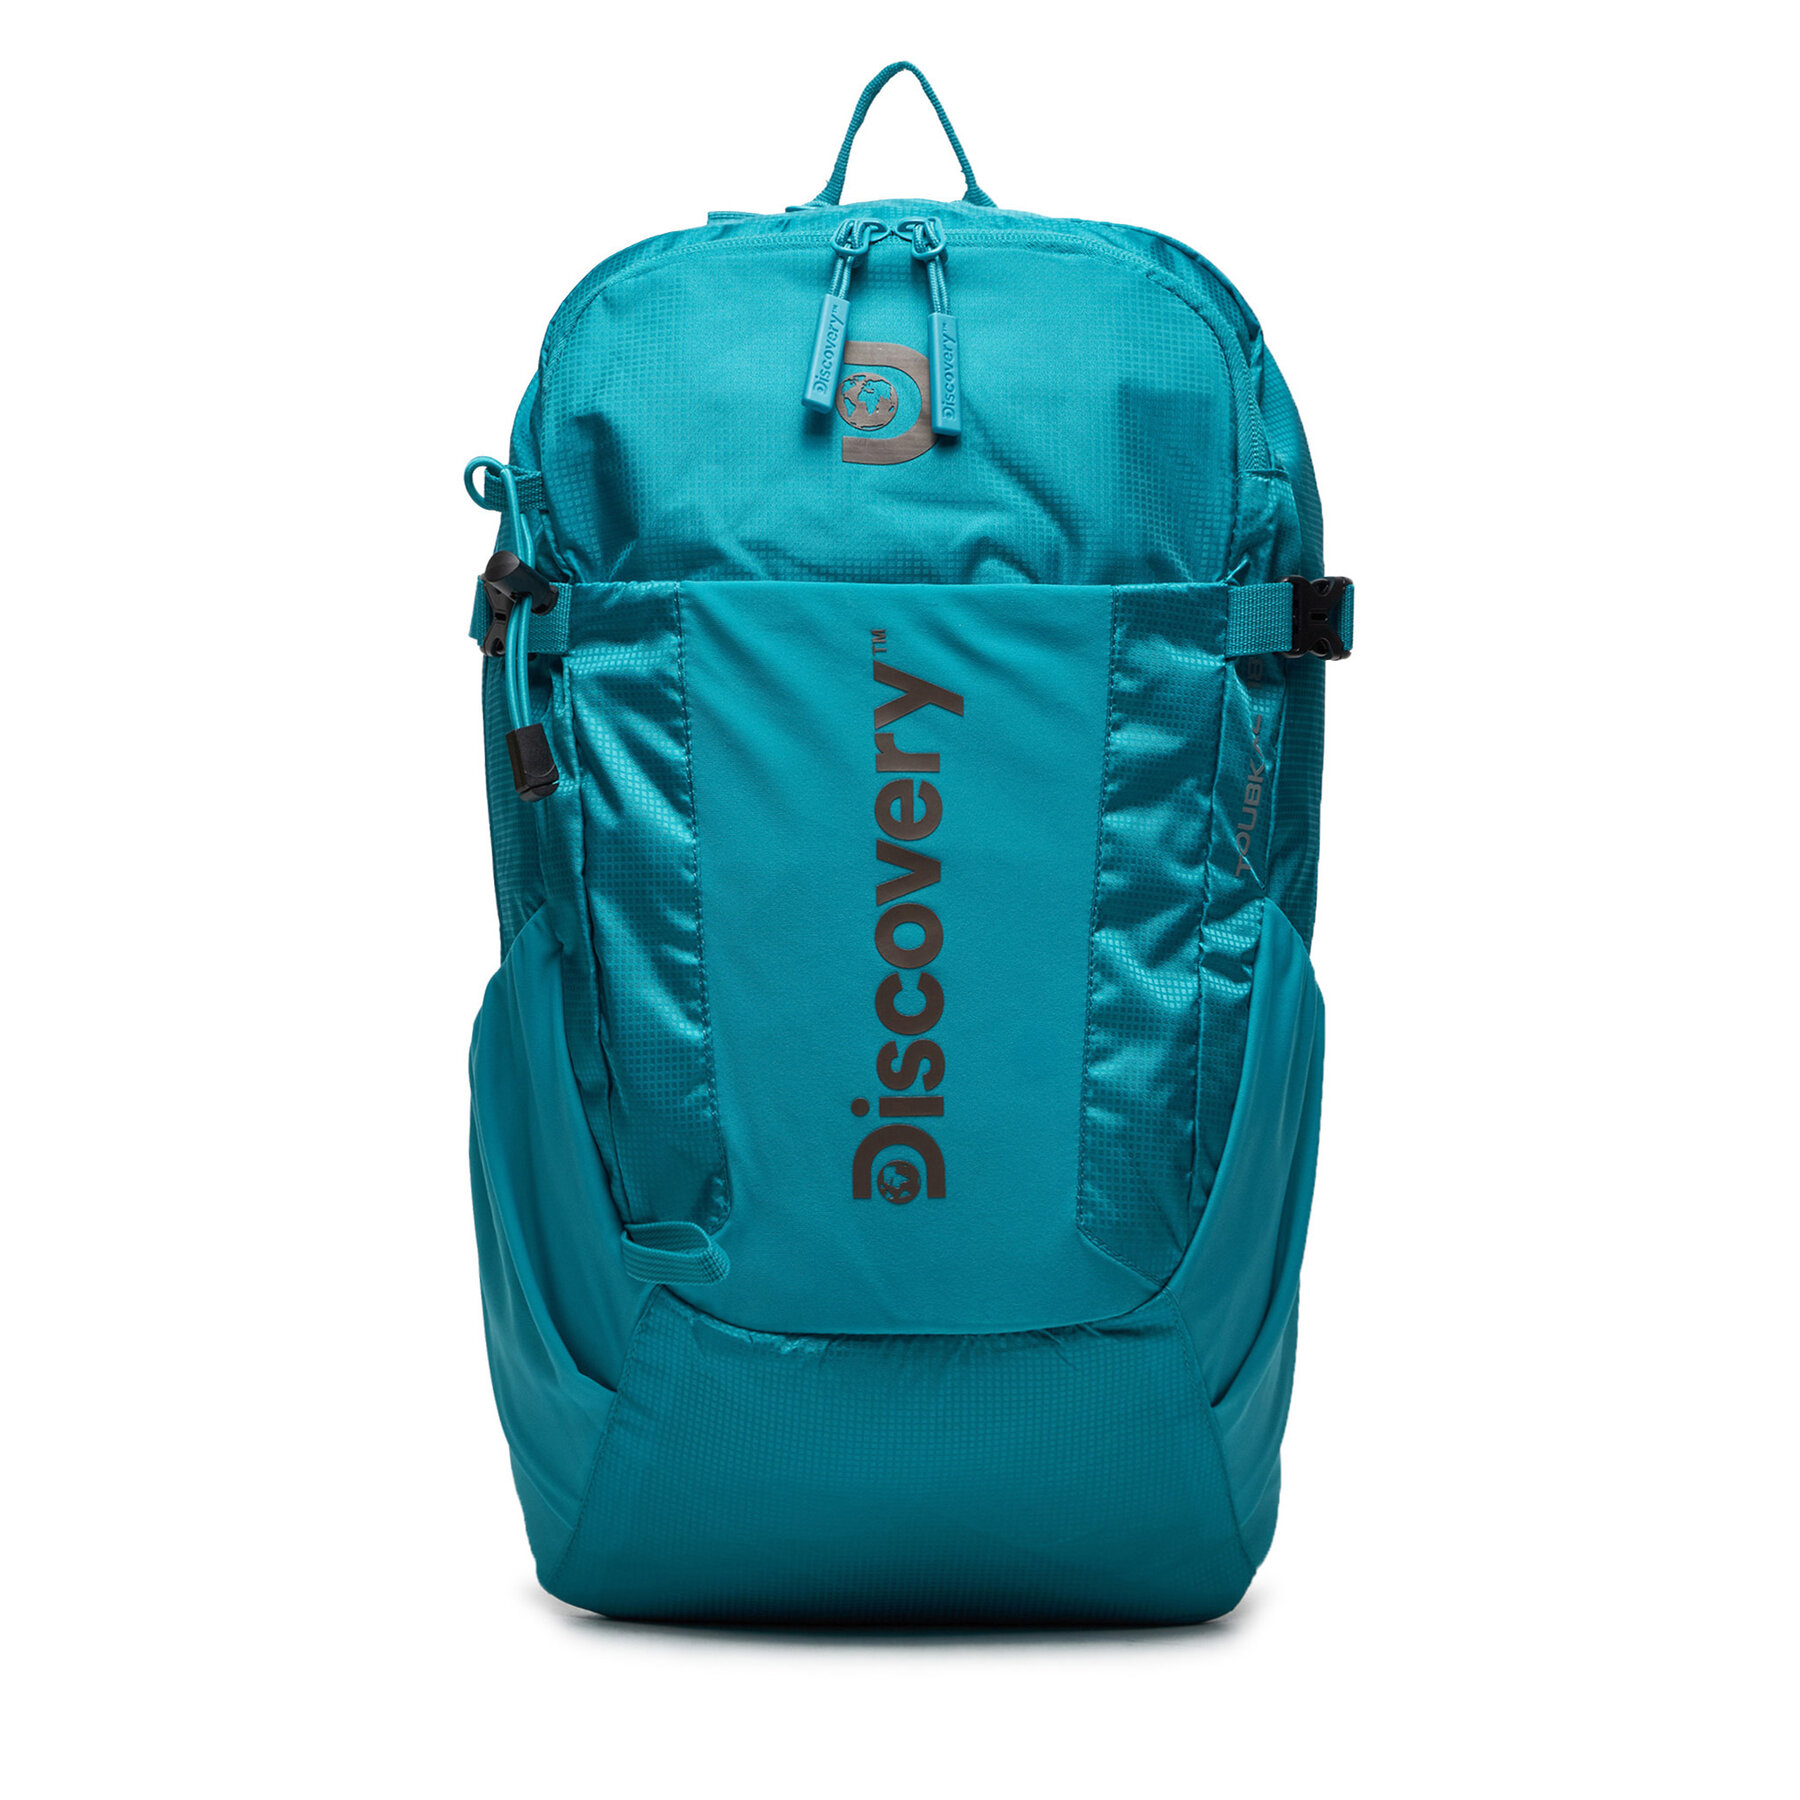 Rucksack Discovery Toubkal 18 D00611.39 Blue von Discovery